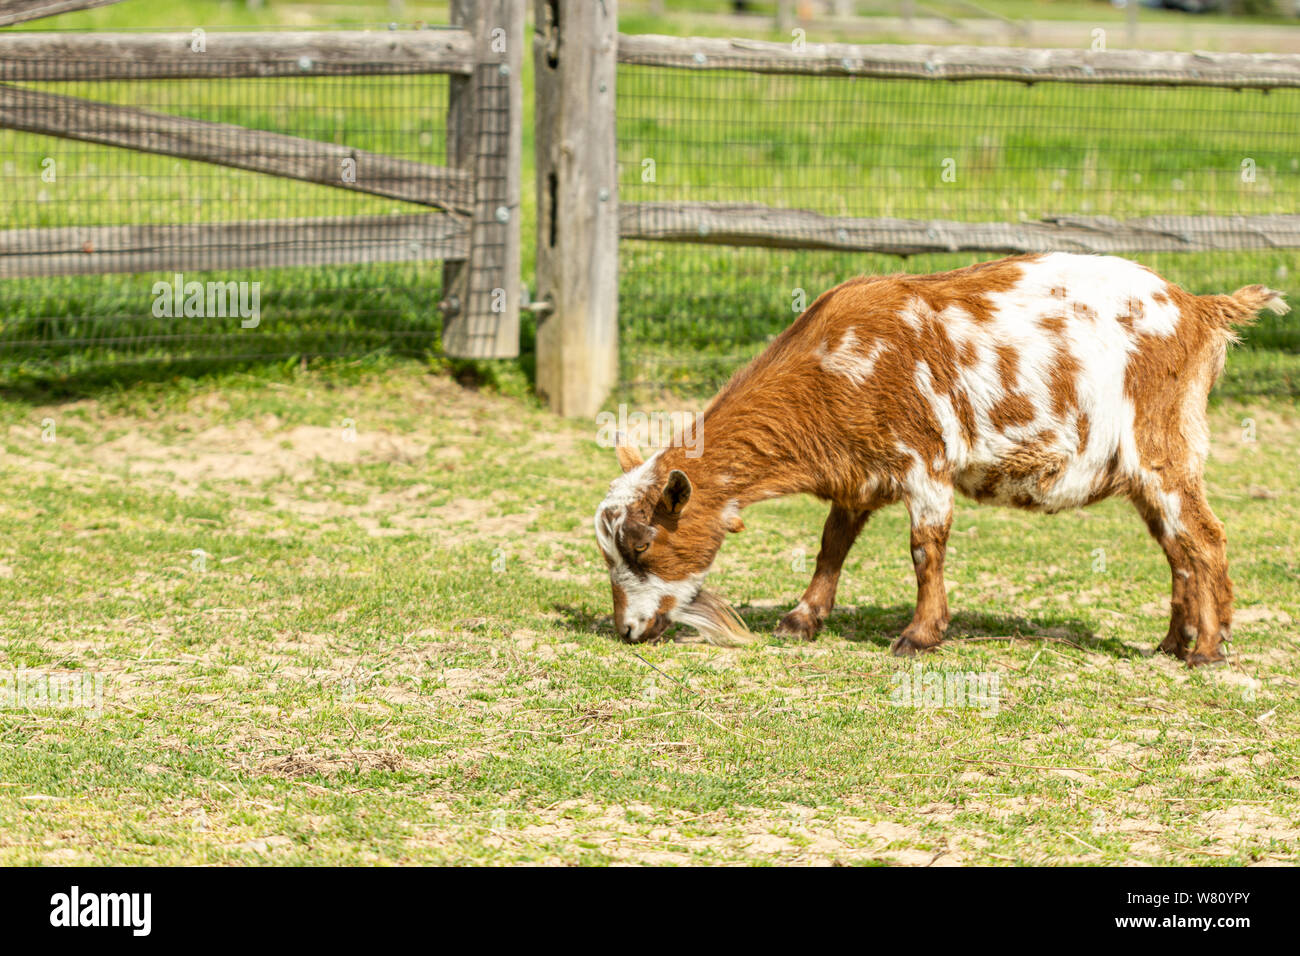 A brown goat eating grass by a wooden fence Stock Photo